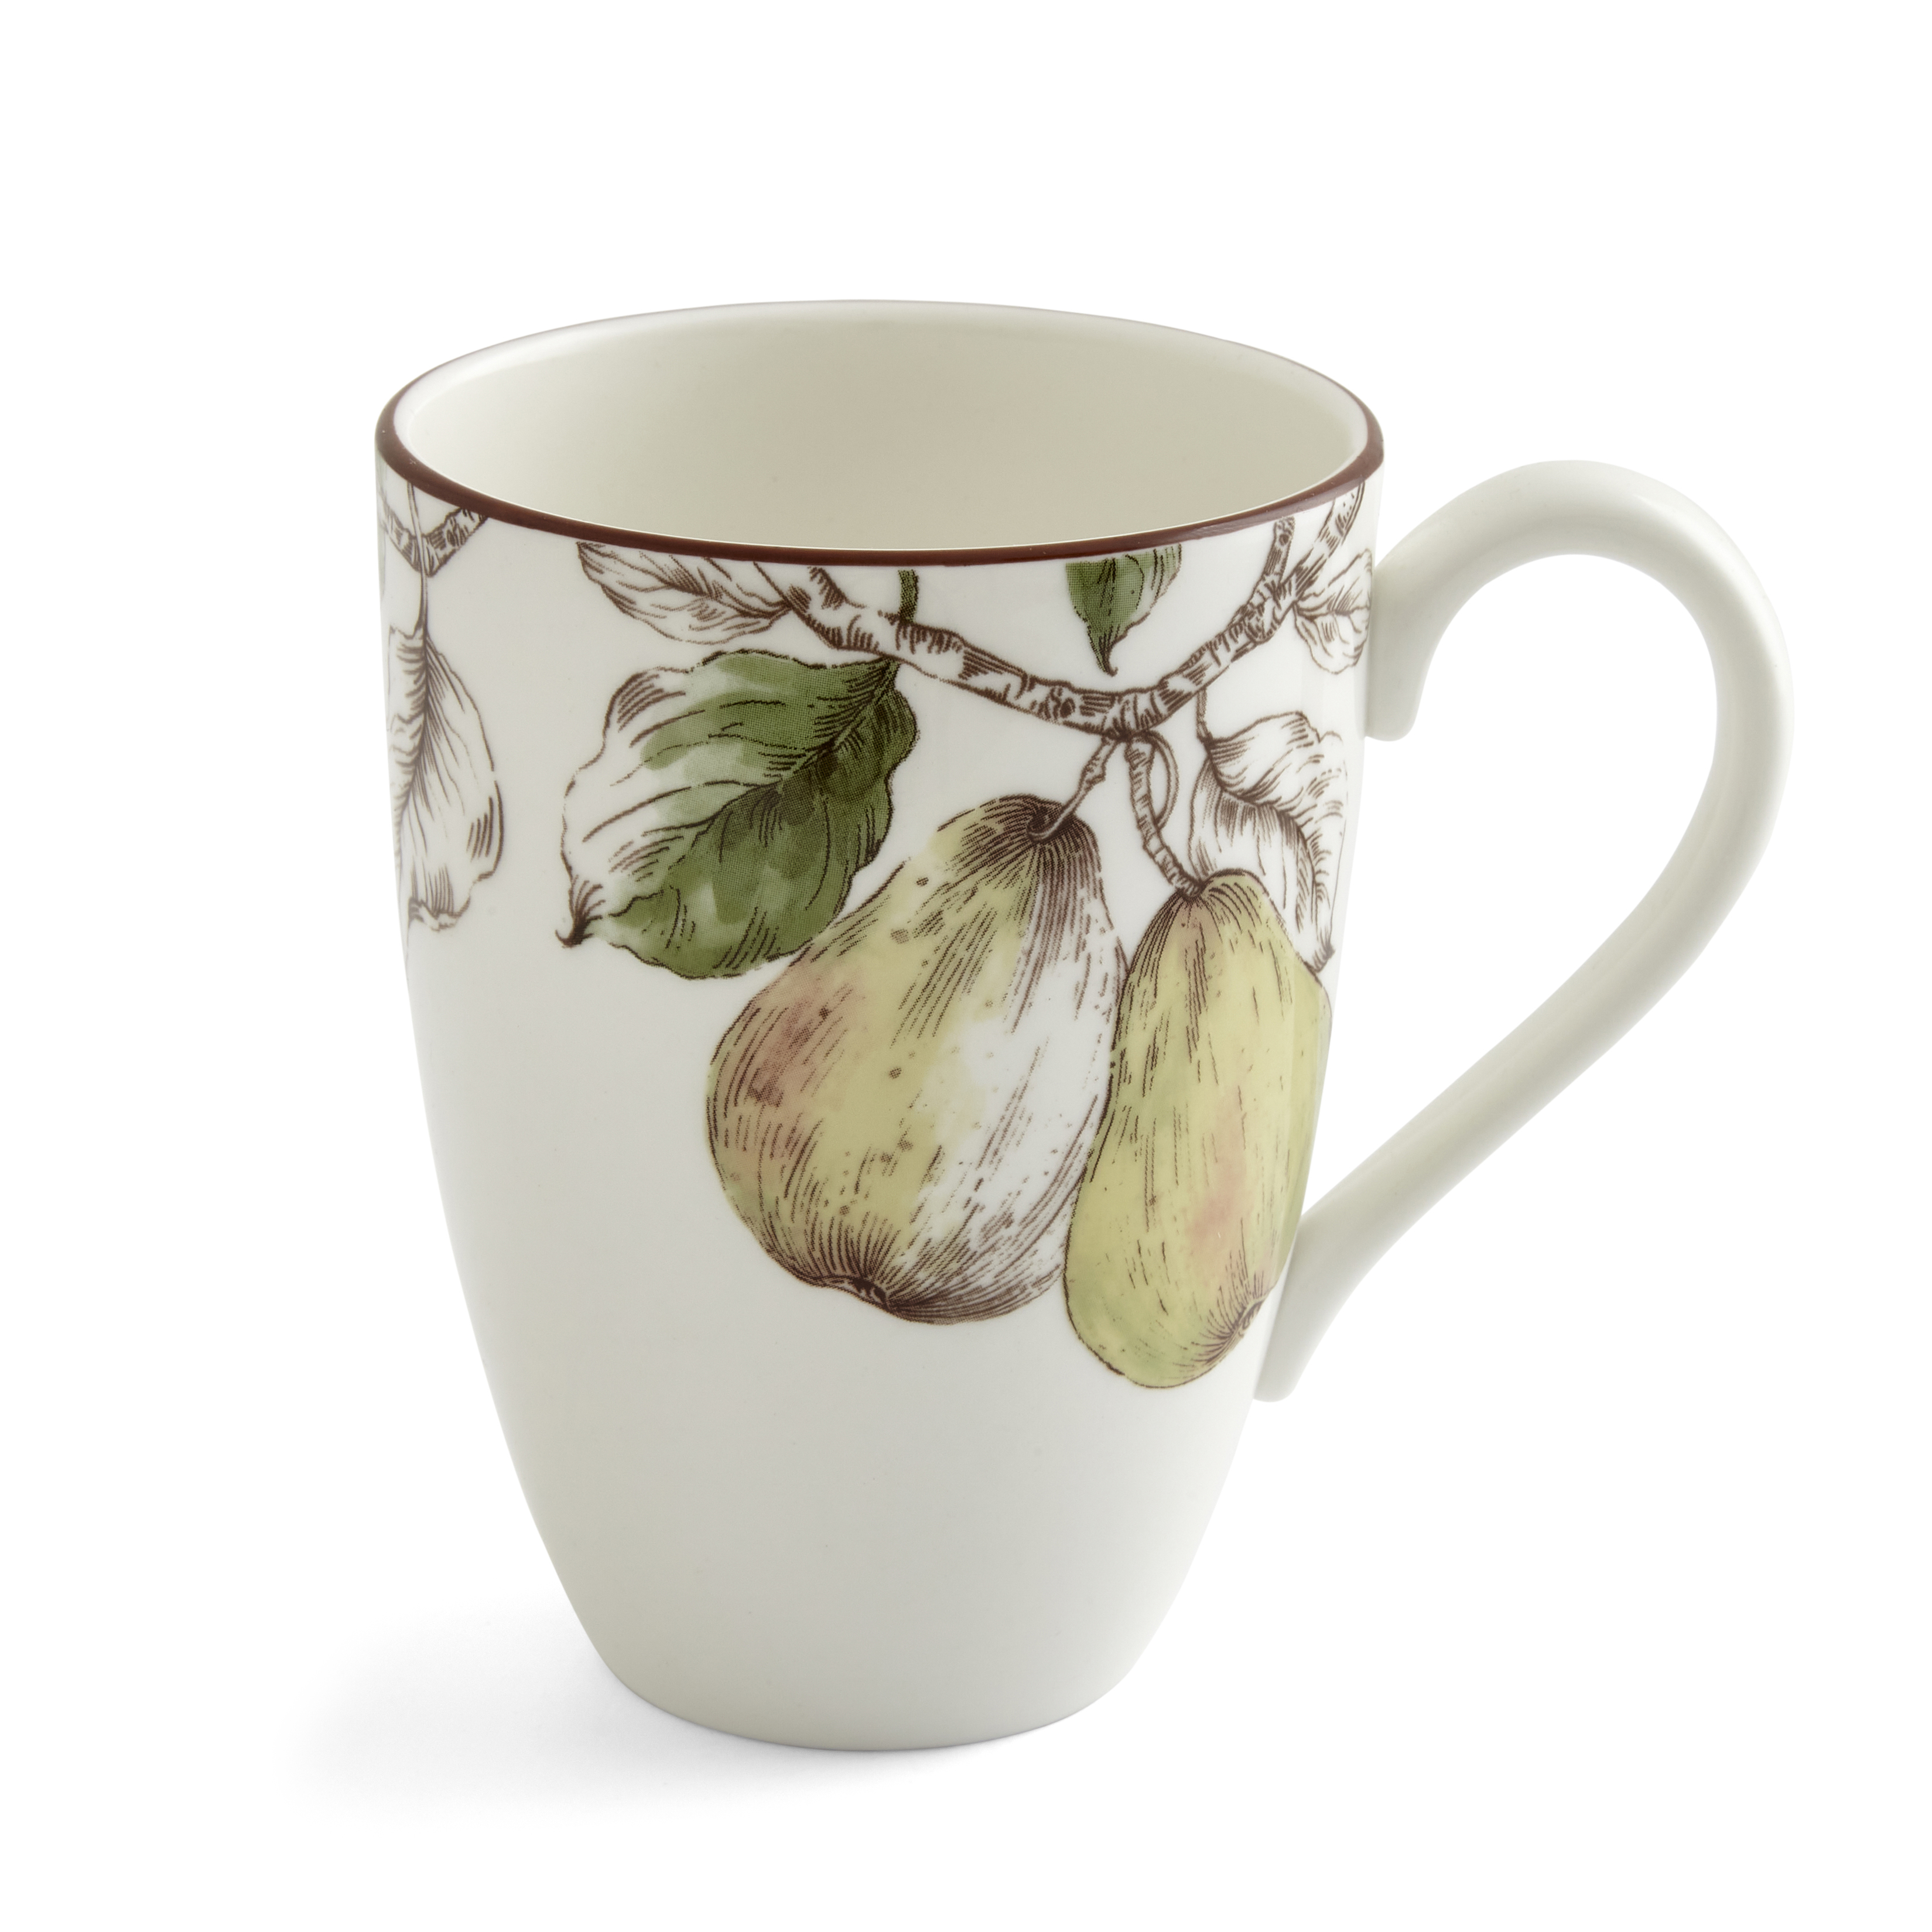 Nature's Bounty 17 Ounce Mug (Pear) image number null